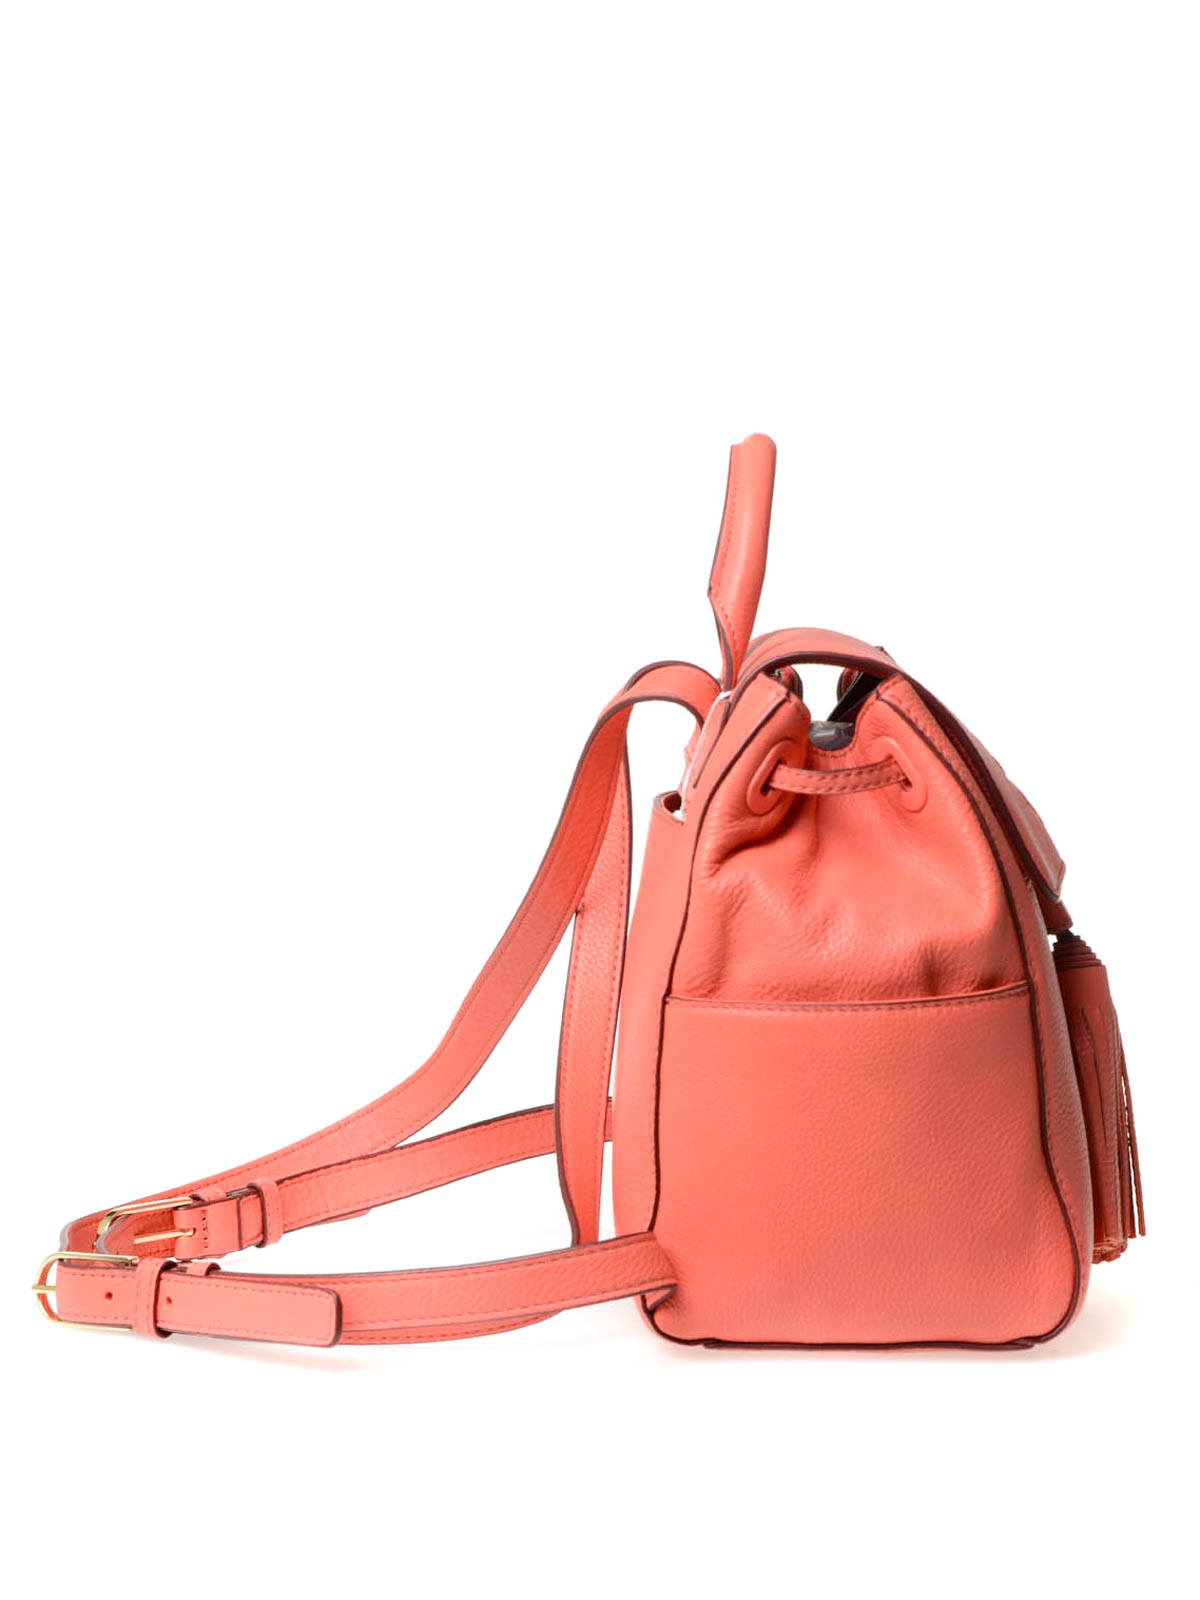 Tory Burch 'thea' Mini Leather Backpack in Pink